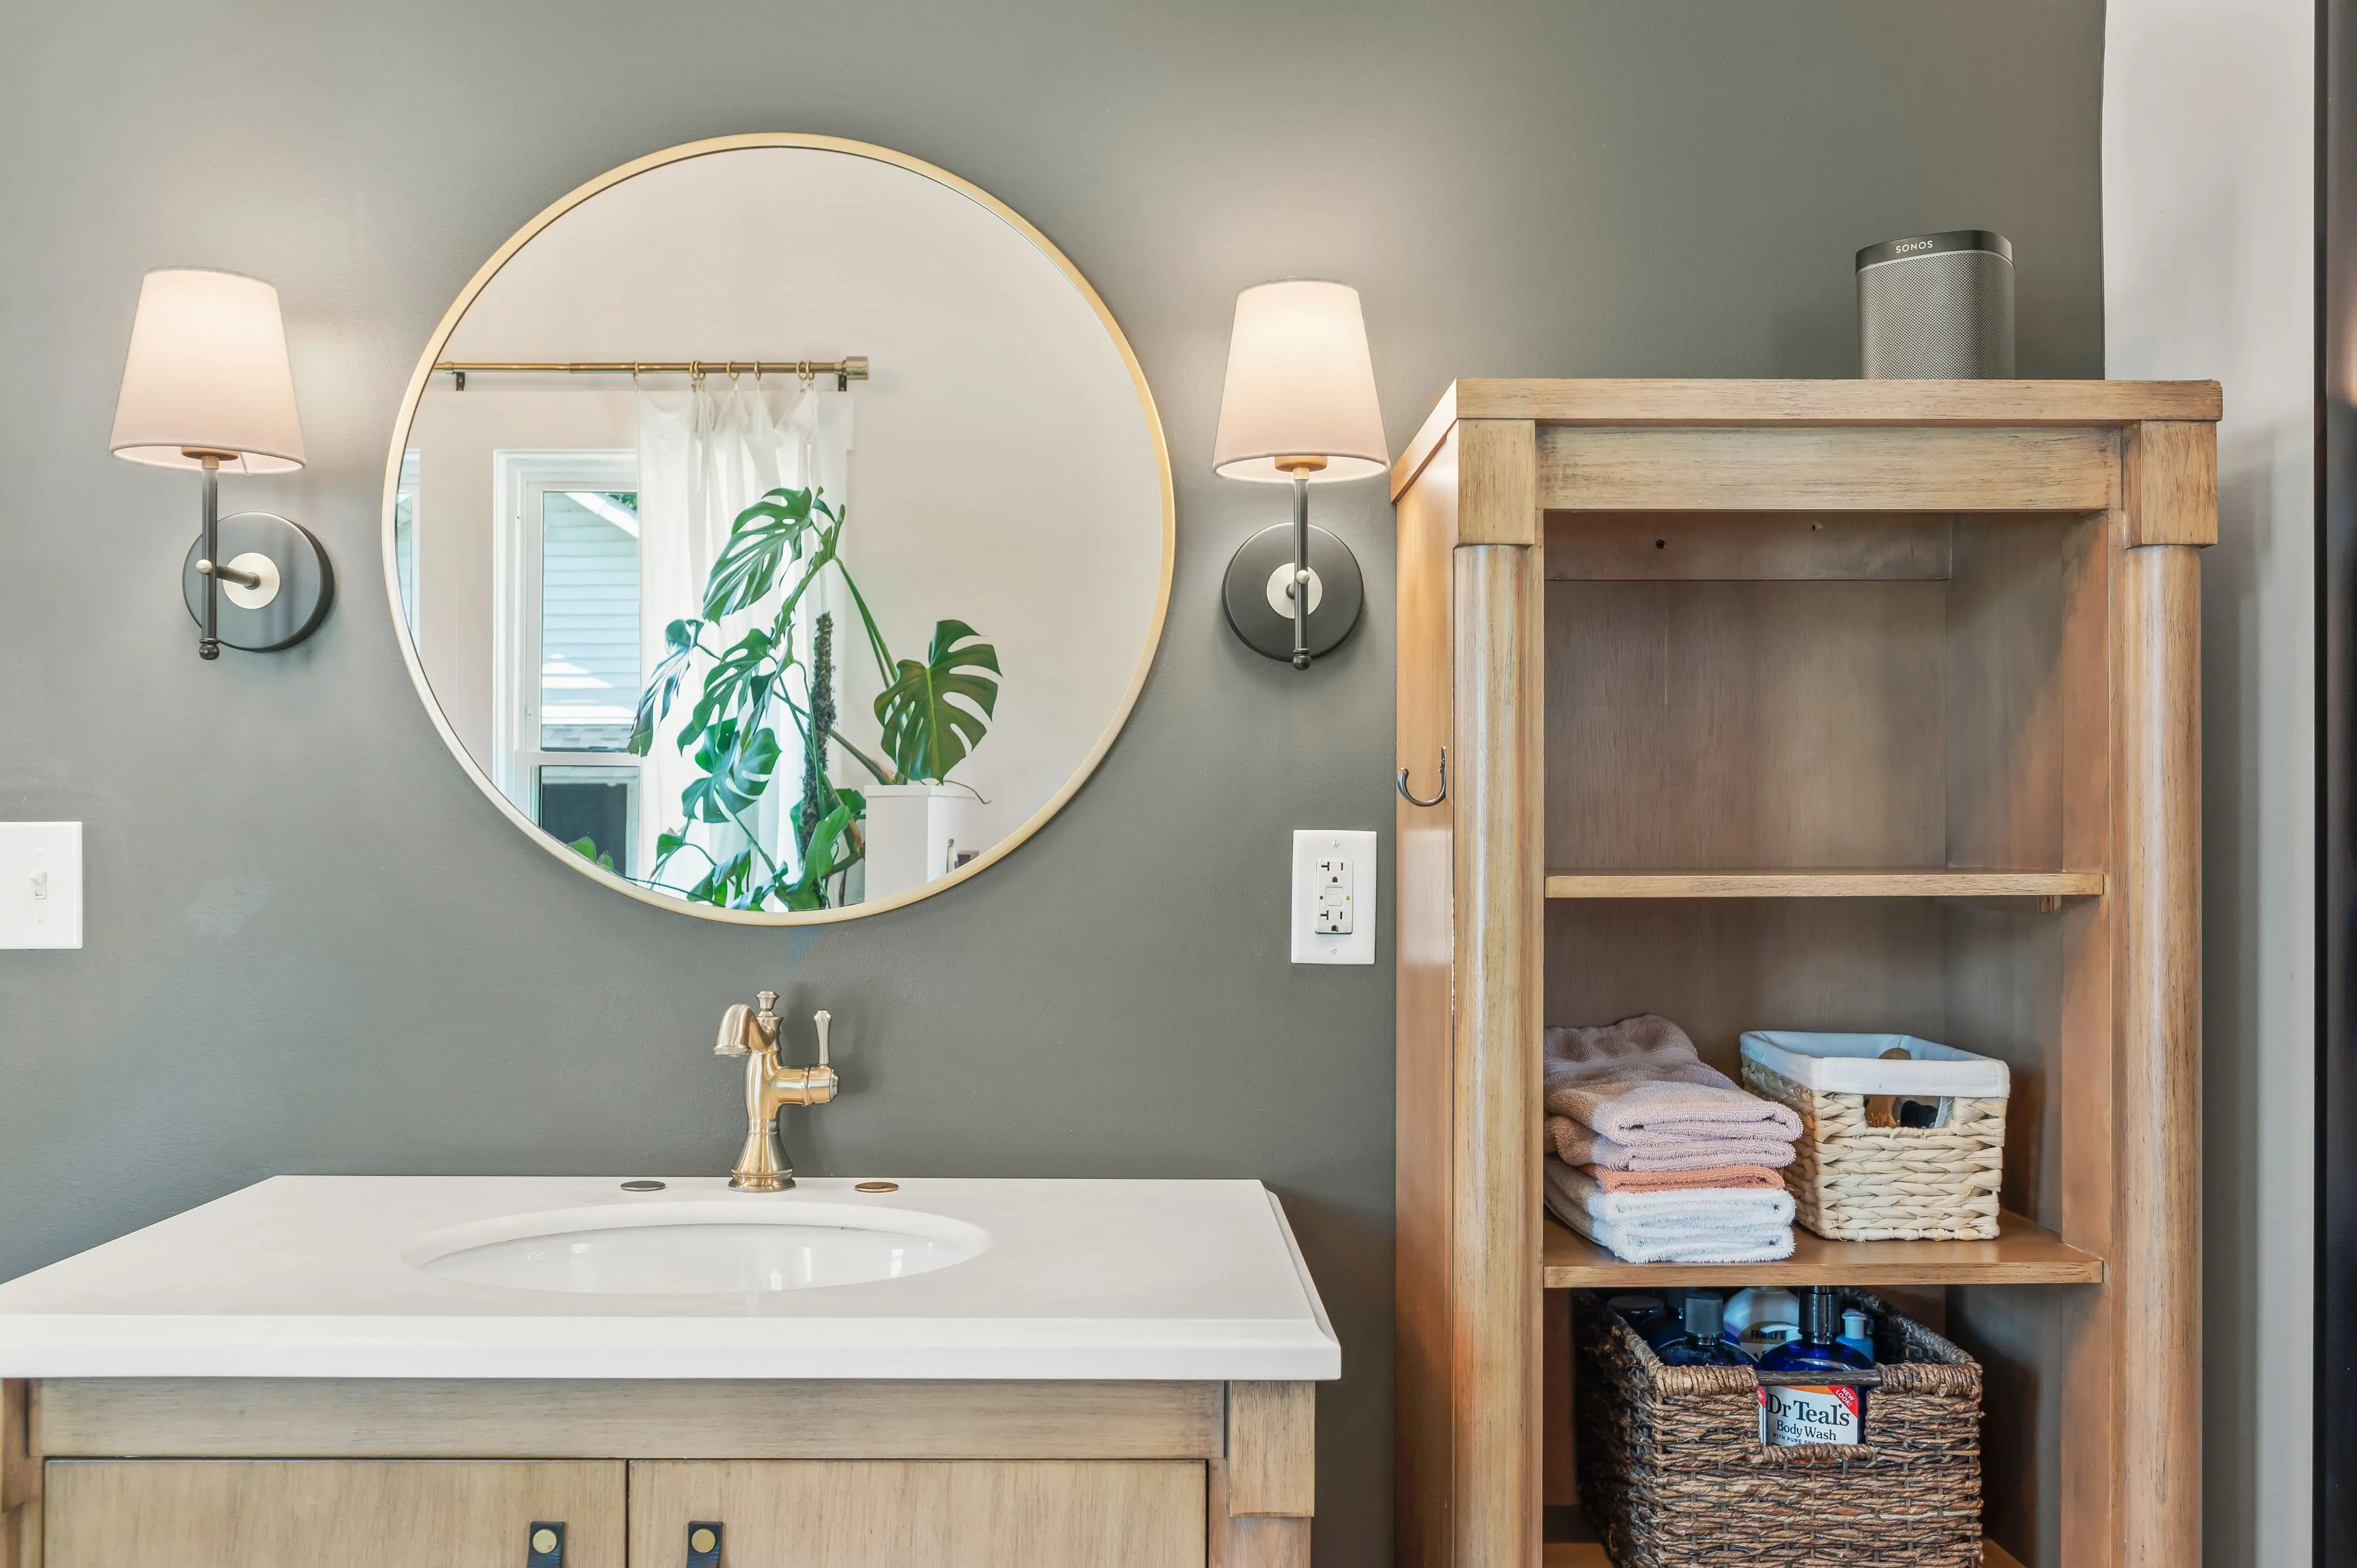 Modern bathroom interior with round mirror, wall sconces, and wooden shelving unit with towels.